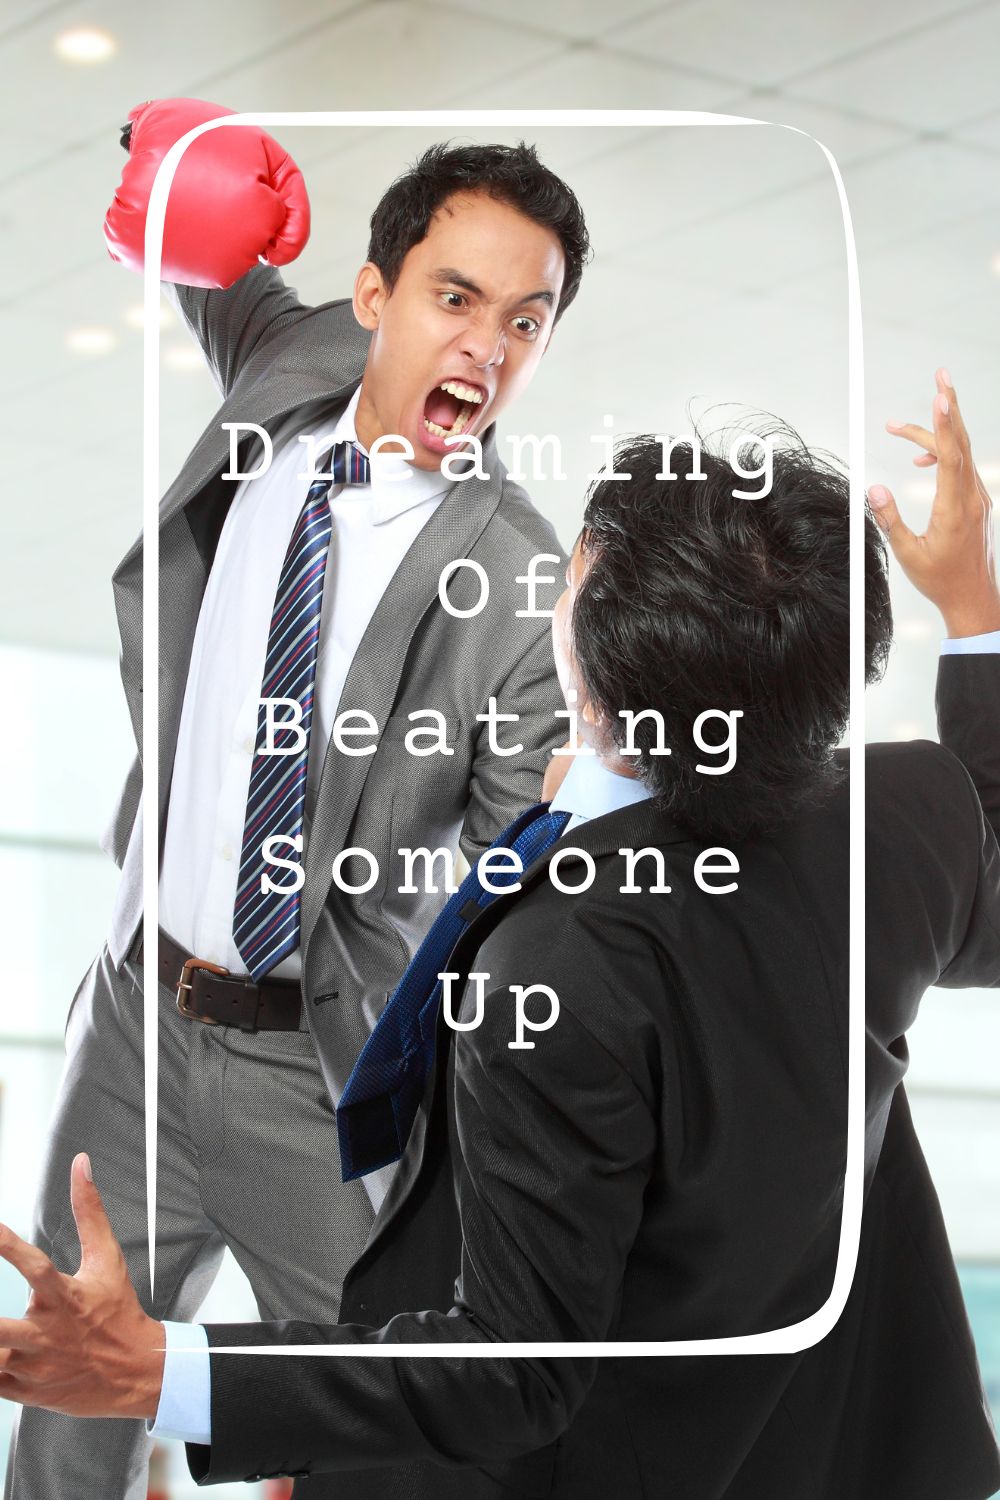 10 Dreaming Of Beating Someone Up Meanings4